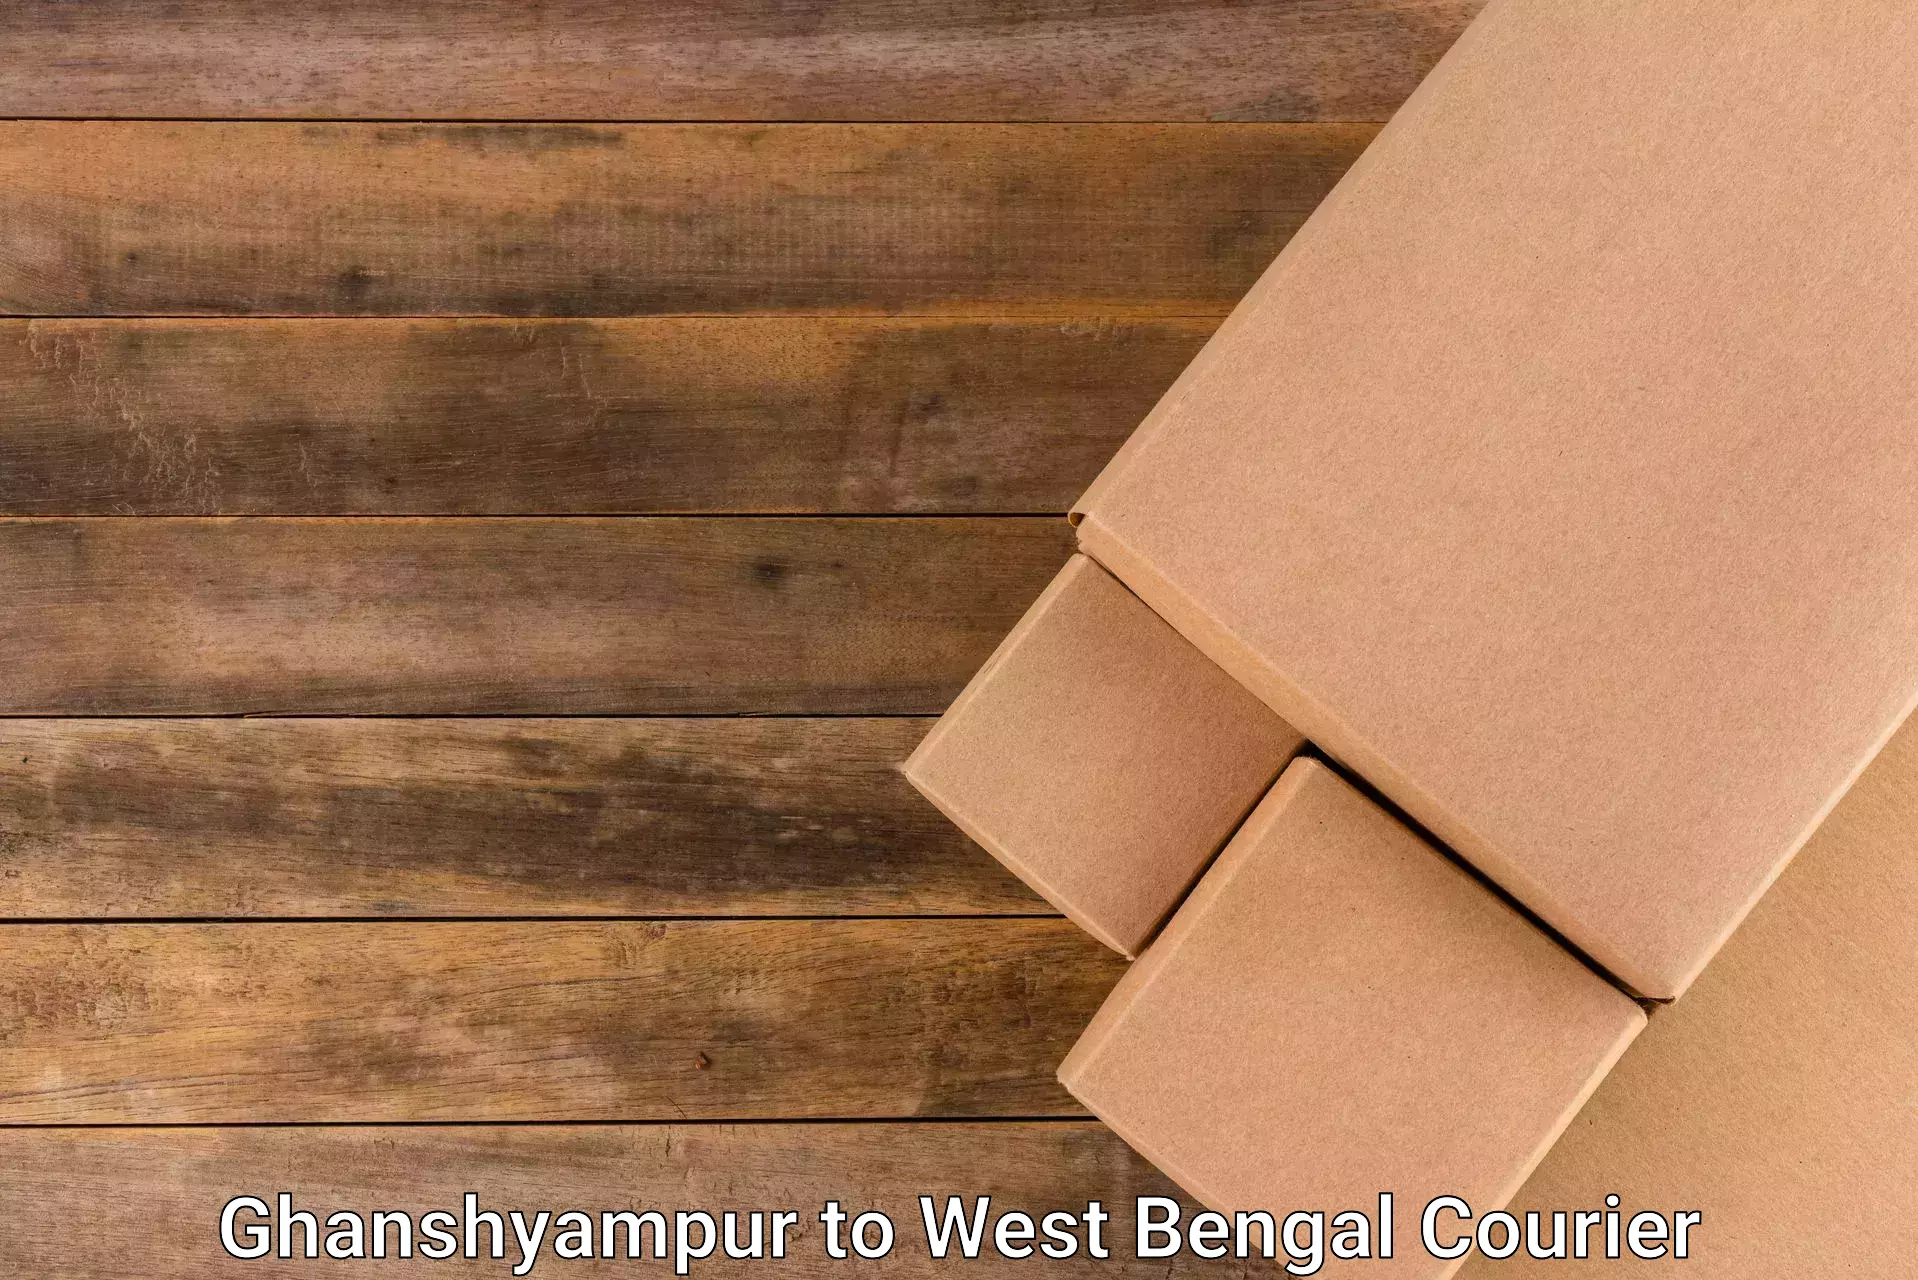 Small business couriers Ghanshyampur to Maynaguri